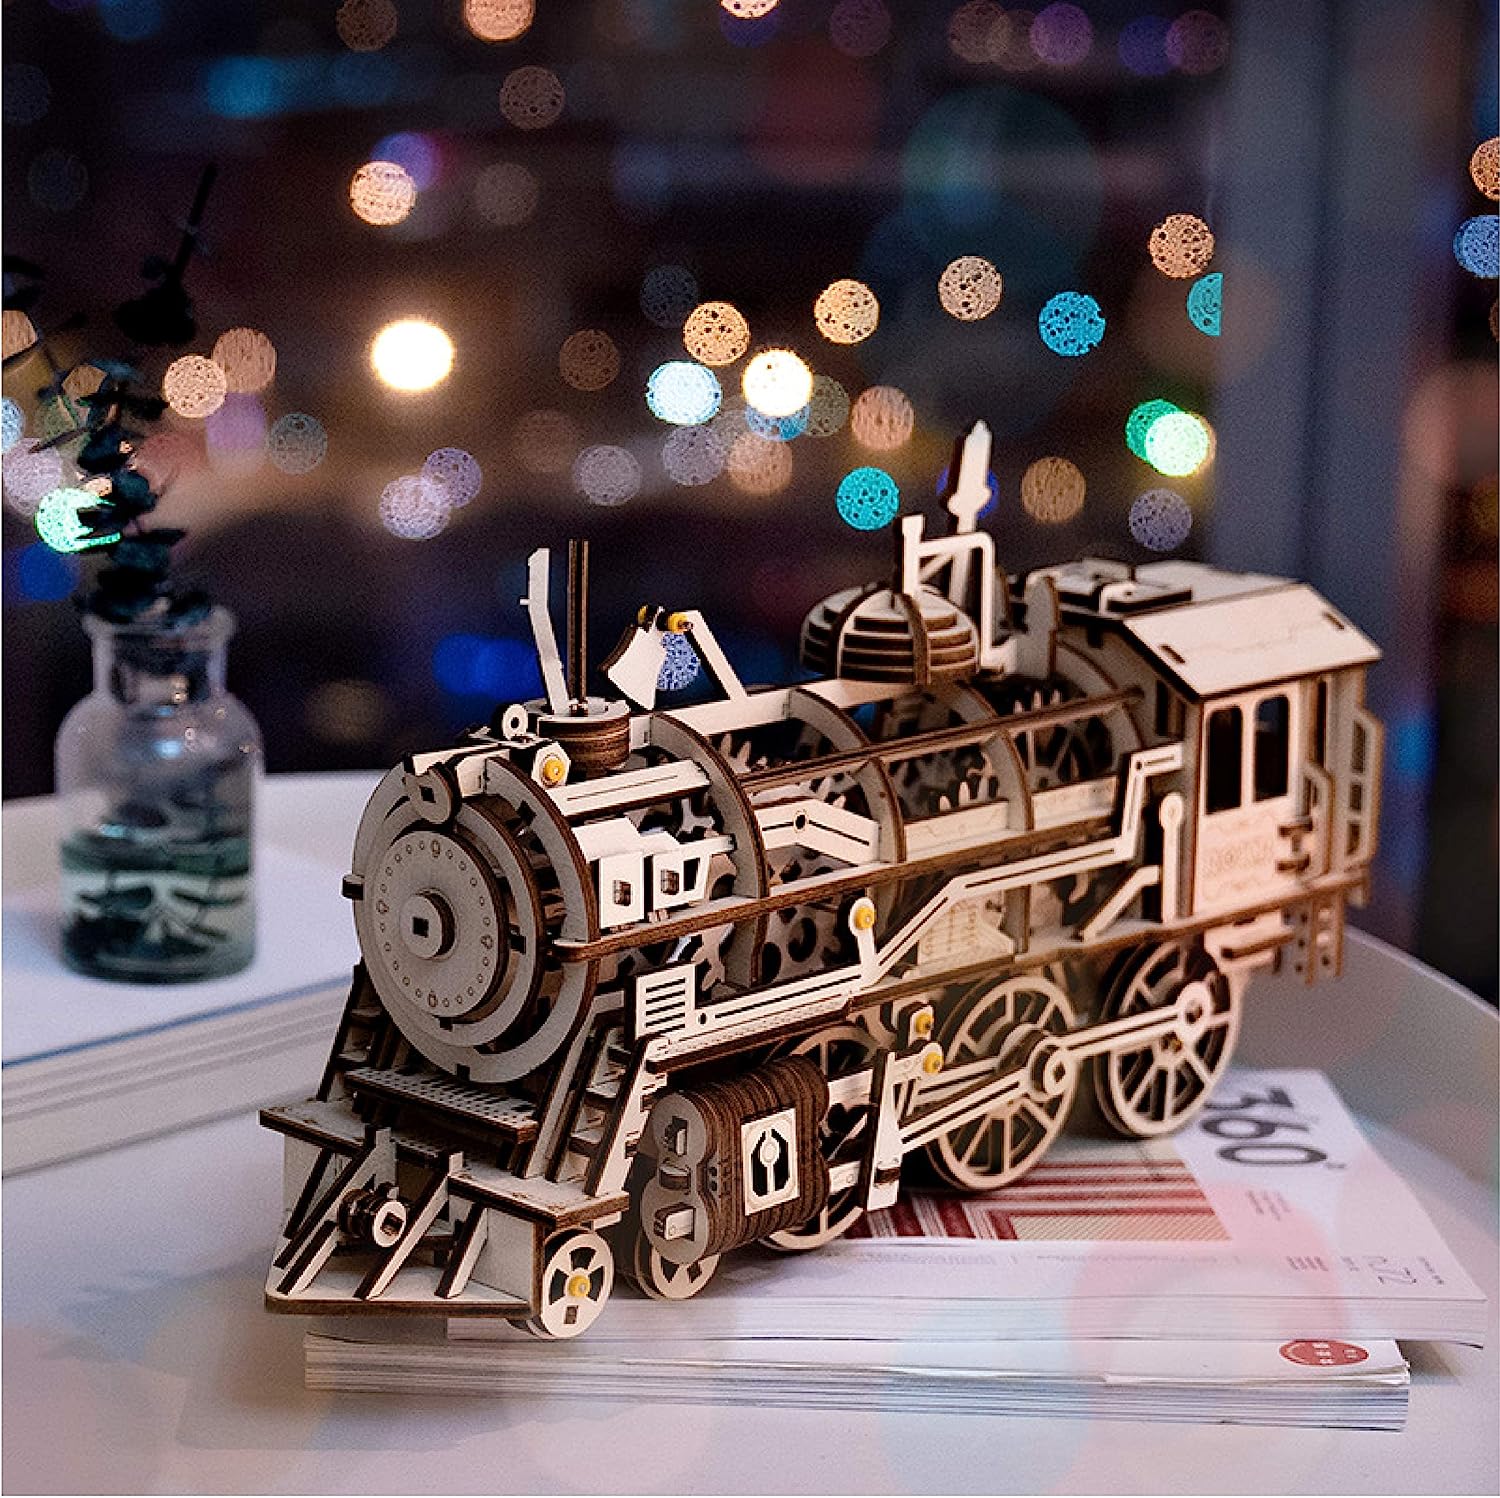 3D Assembly Wooden Puzzle Laser-Cut Locomotive Kit Mechanical Gears Toy Brain Teaser Games Best Birthday Gifts for Engineer Husband & Boyfriend & Teen Boys & Adults